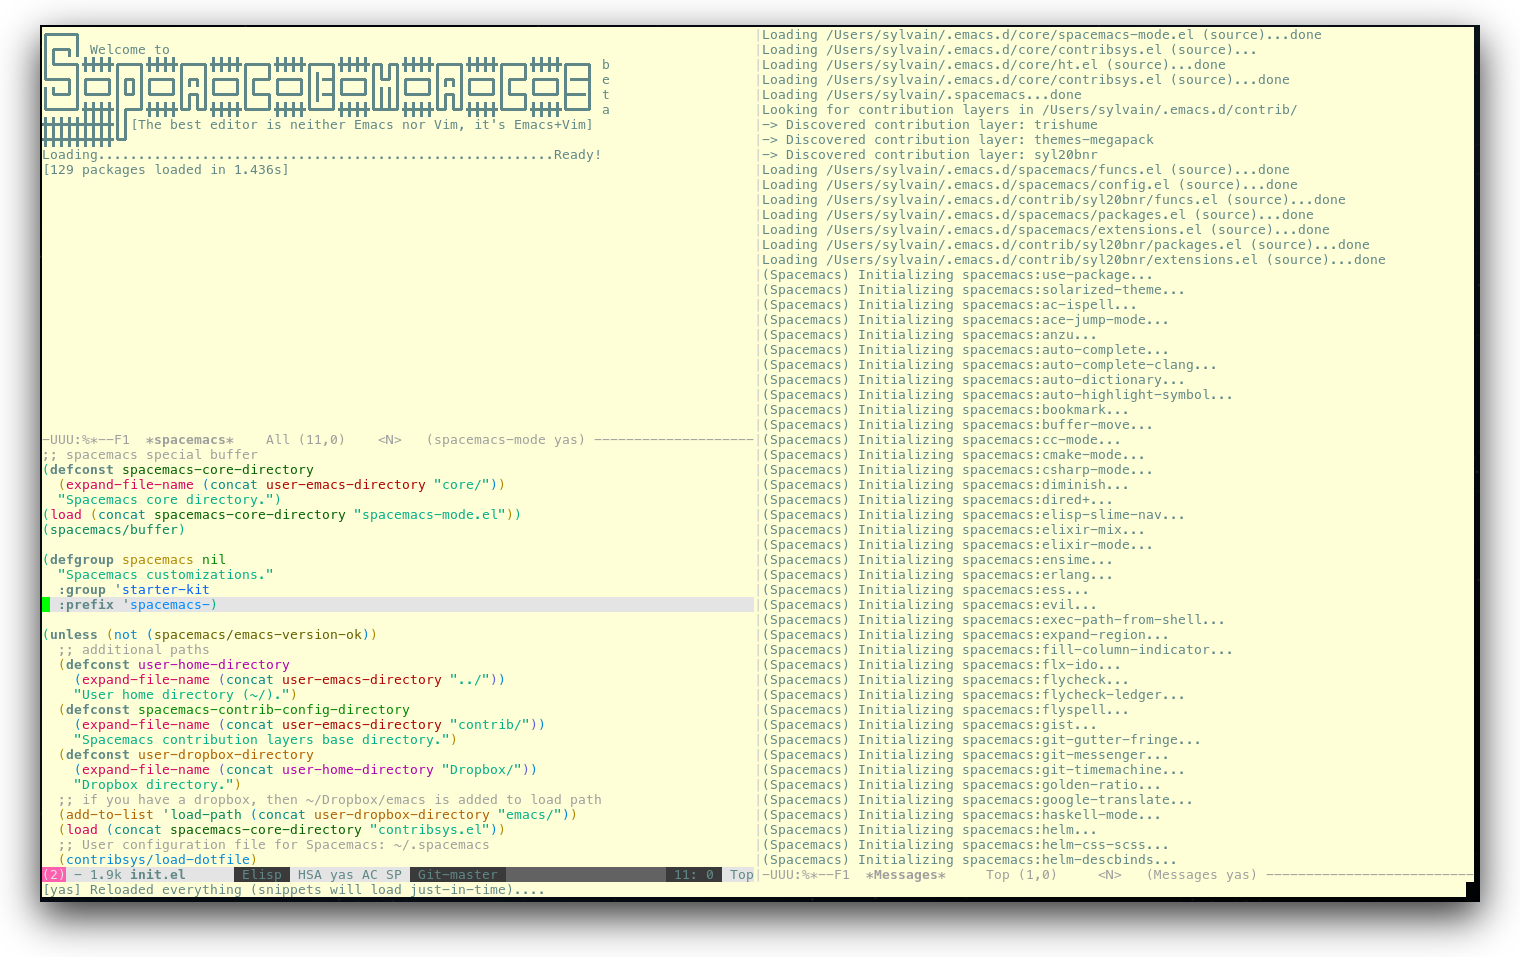 /TakeV/spacemacs/media/commit/3c2475d4aa8e57f67d254648897a63108d16893e/doc/img/spacemacs-urxvt.png